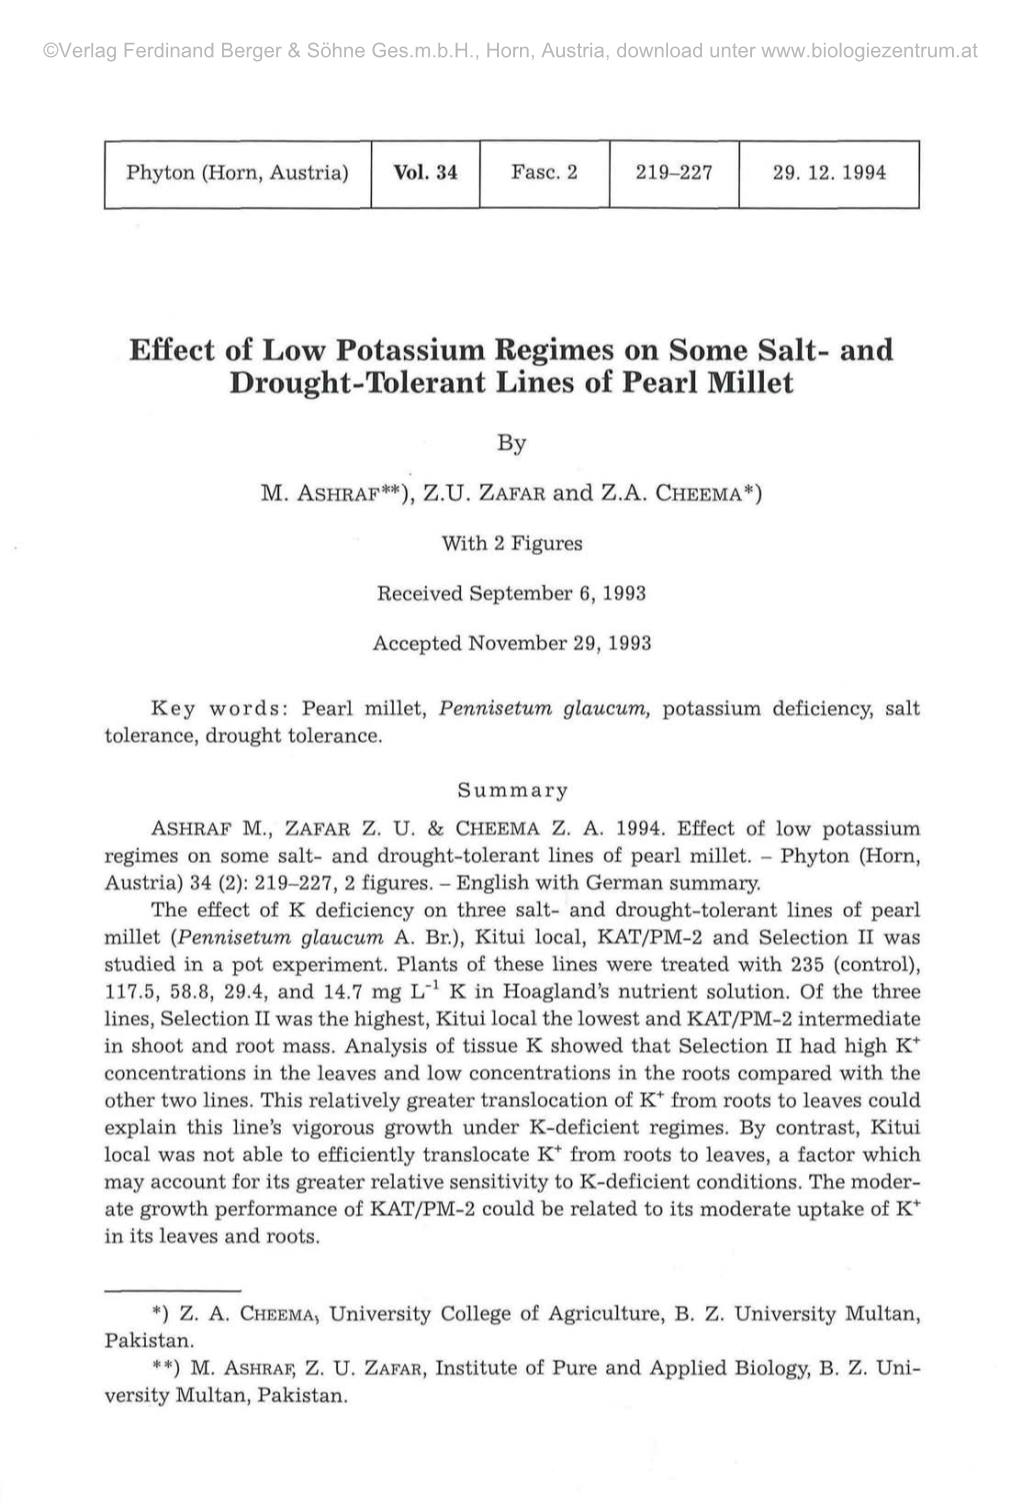 Effect of Low Potassium Regimes on Some Salt- and Drought-Tolerant Lines of Pearl Millet